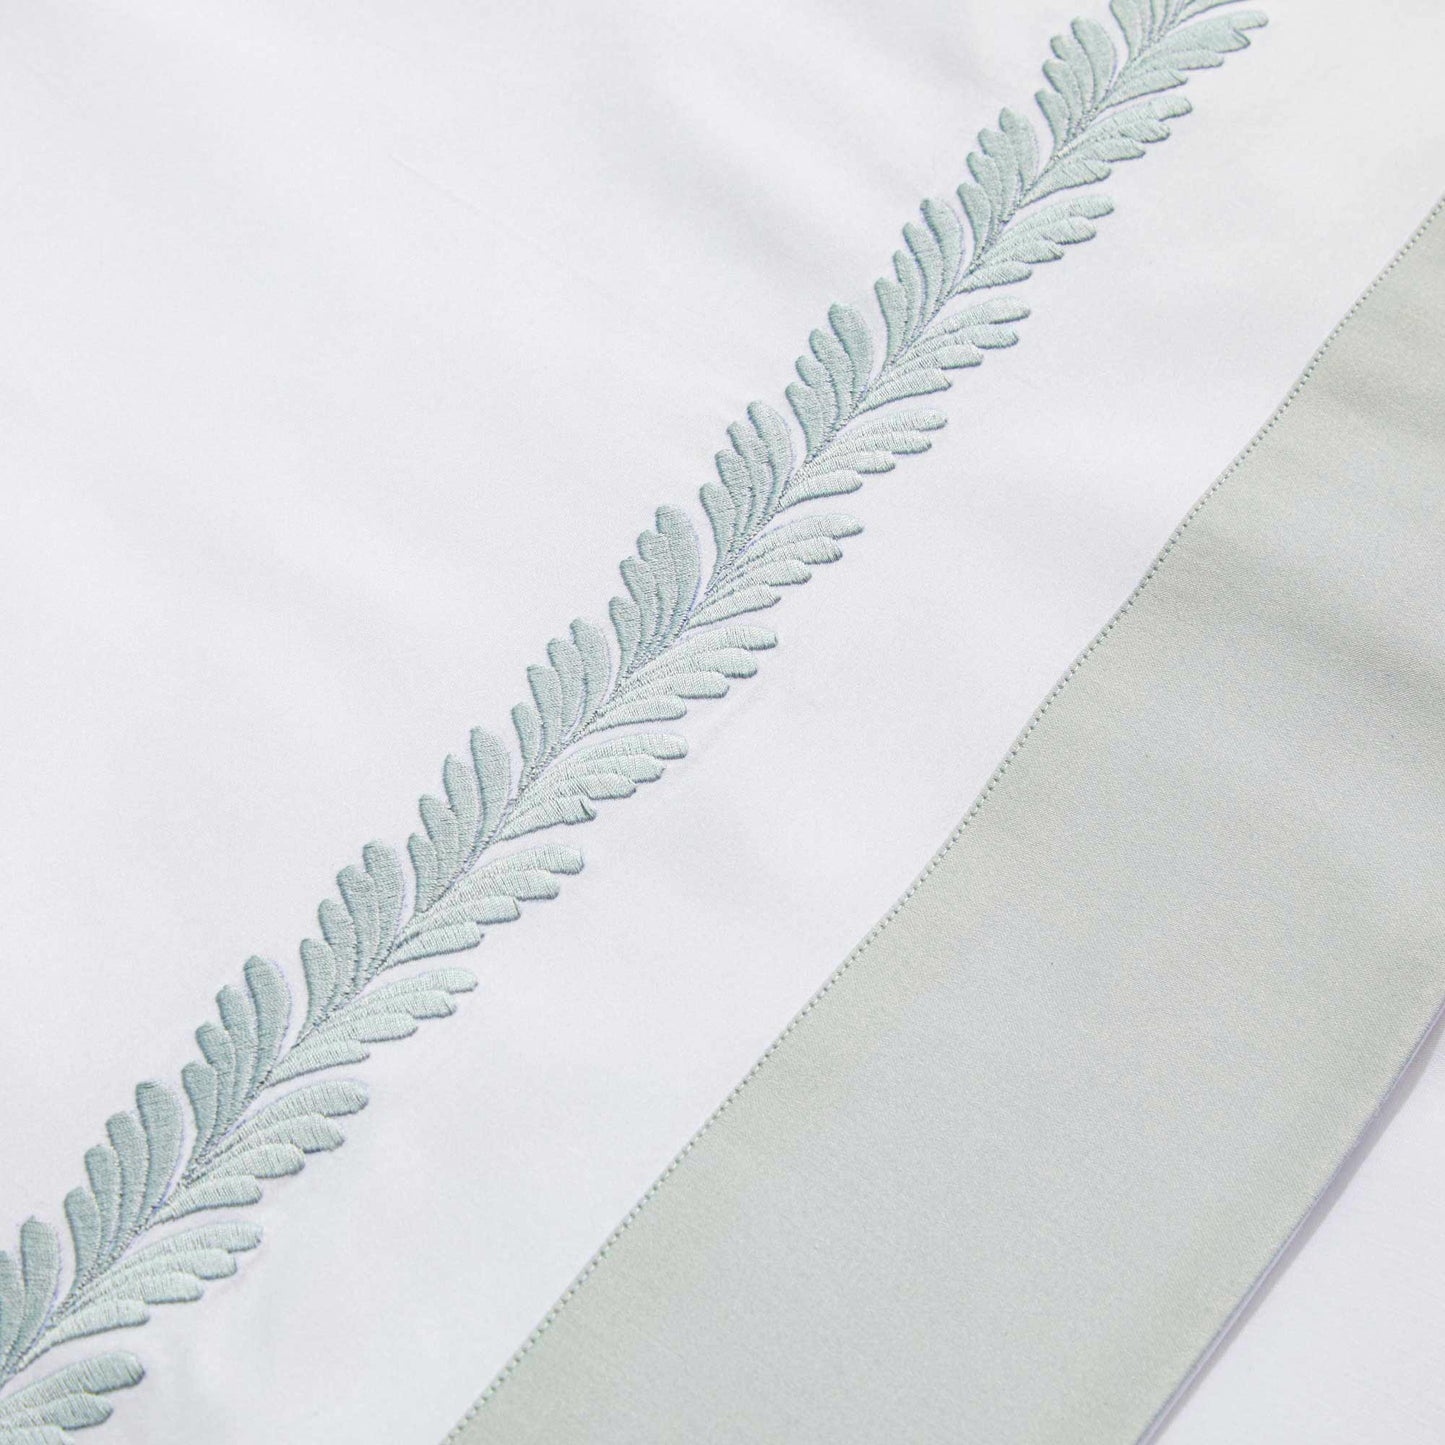 300TC Cotton Percale Sheet Set with Satin Border and Embroidery - Botero